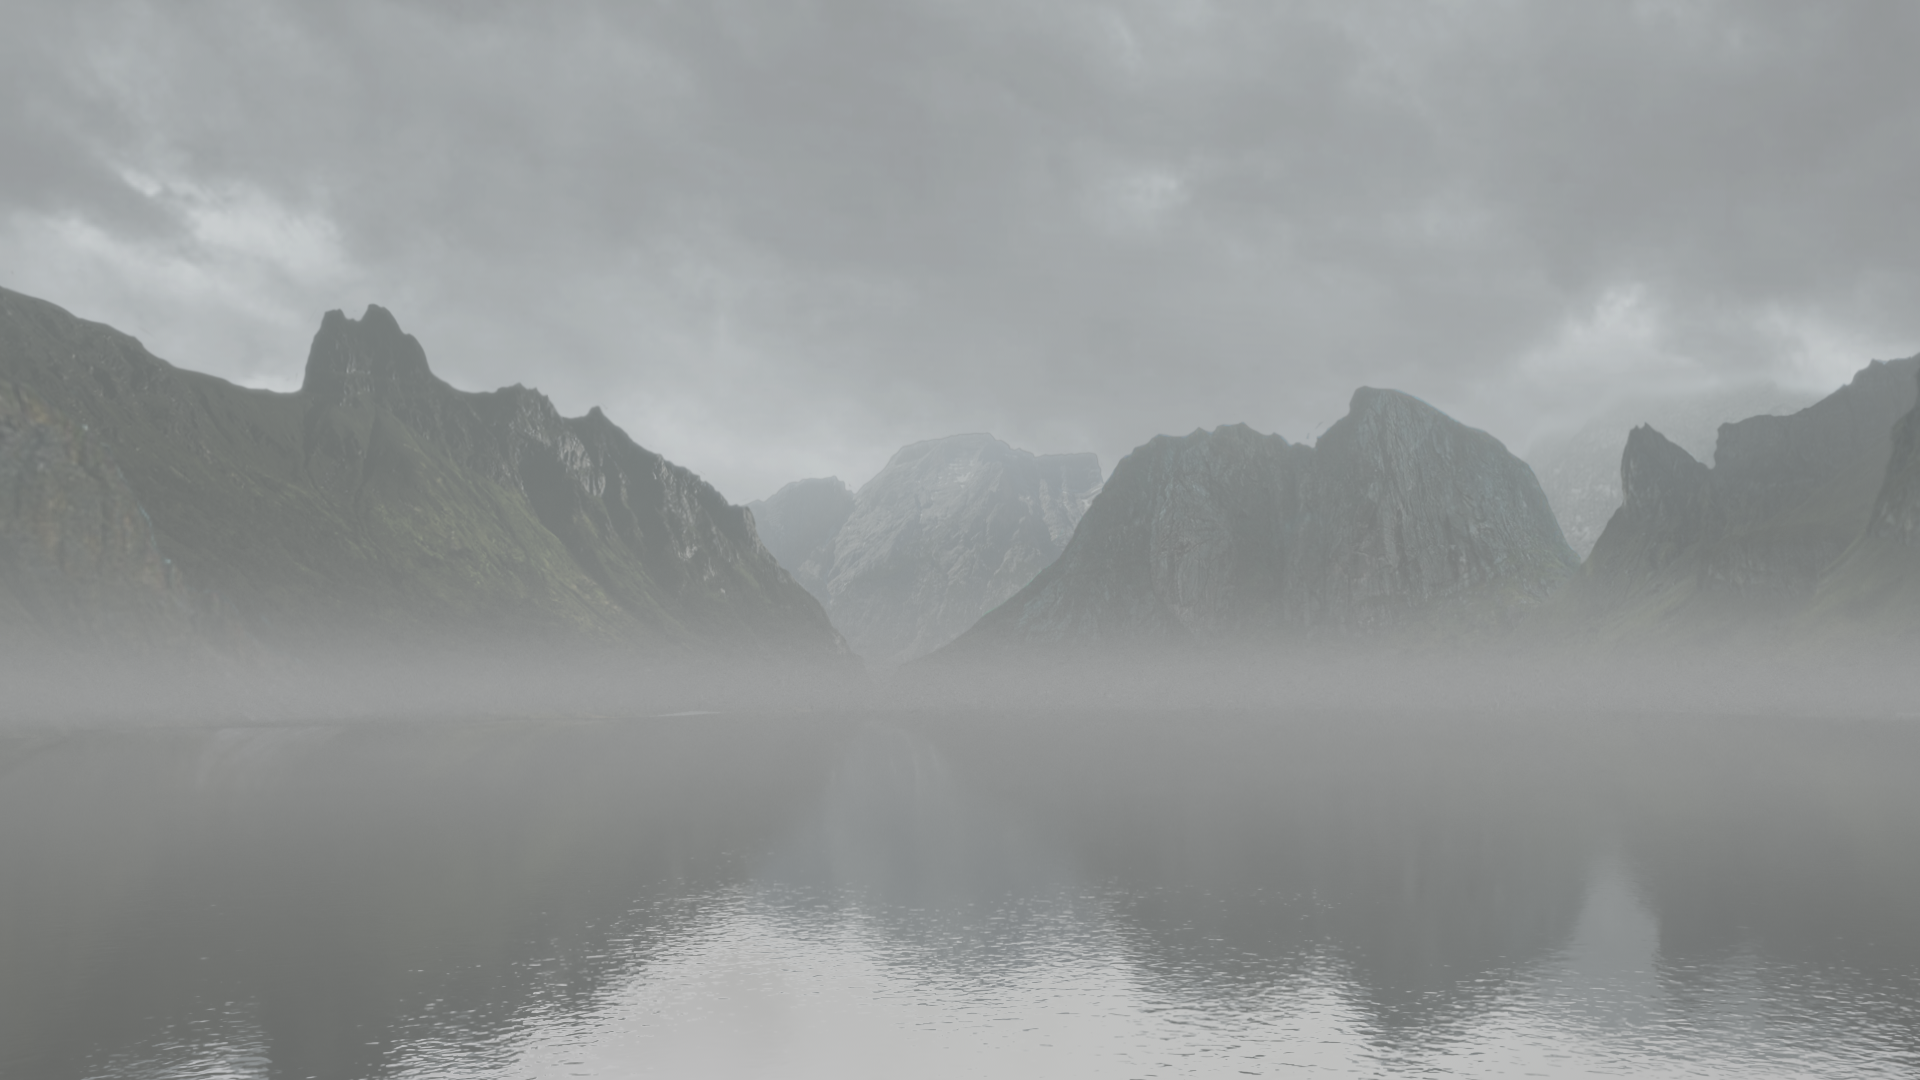 VFX Matte Painting and compositing work by Caroline Roug√© showing a mountain lake landscape